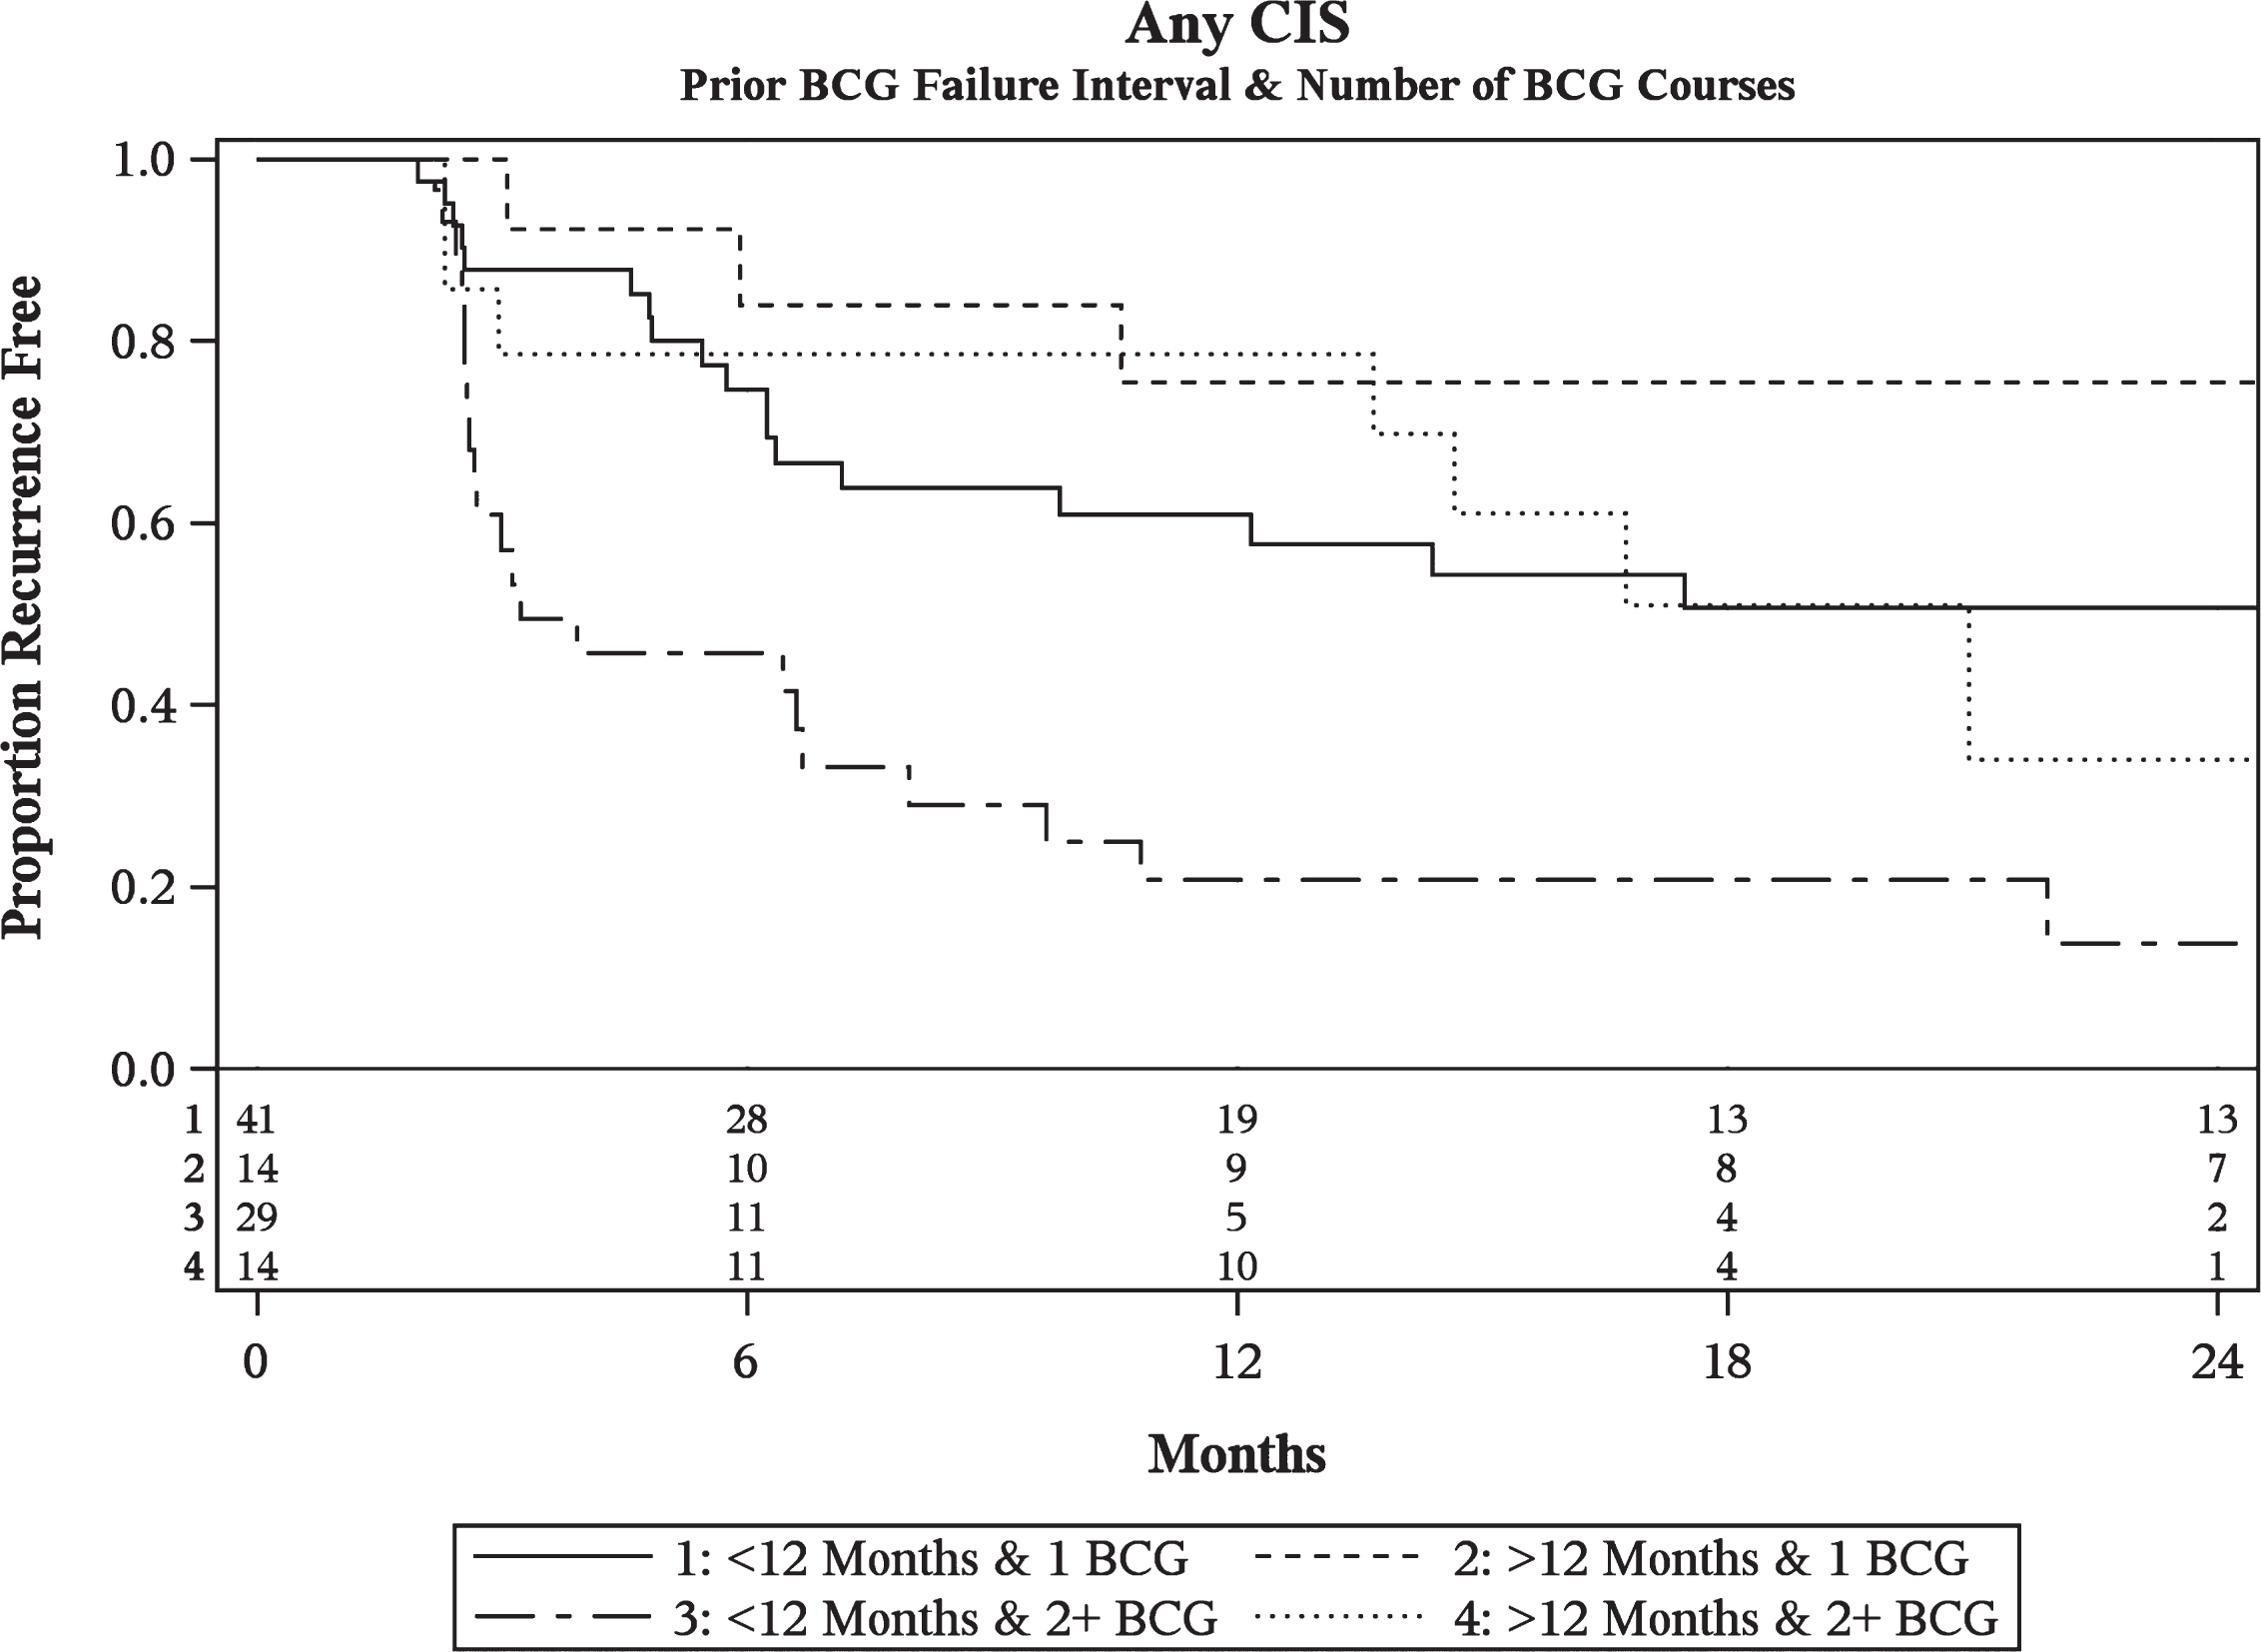 Kaplan-Meier plot of treatment success of intravesical BCG/IFN in BCG Failure patients with recurrent CIS stratified by prior BCG failure interval and number of prior BCG failures including number at-risk.